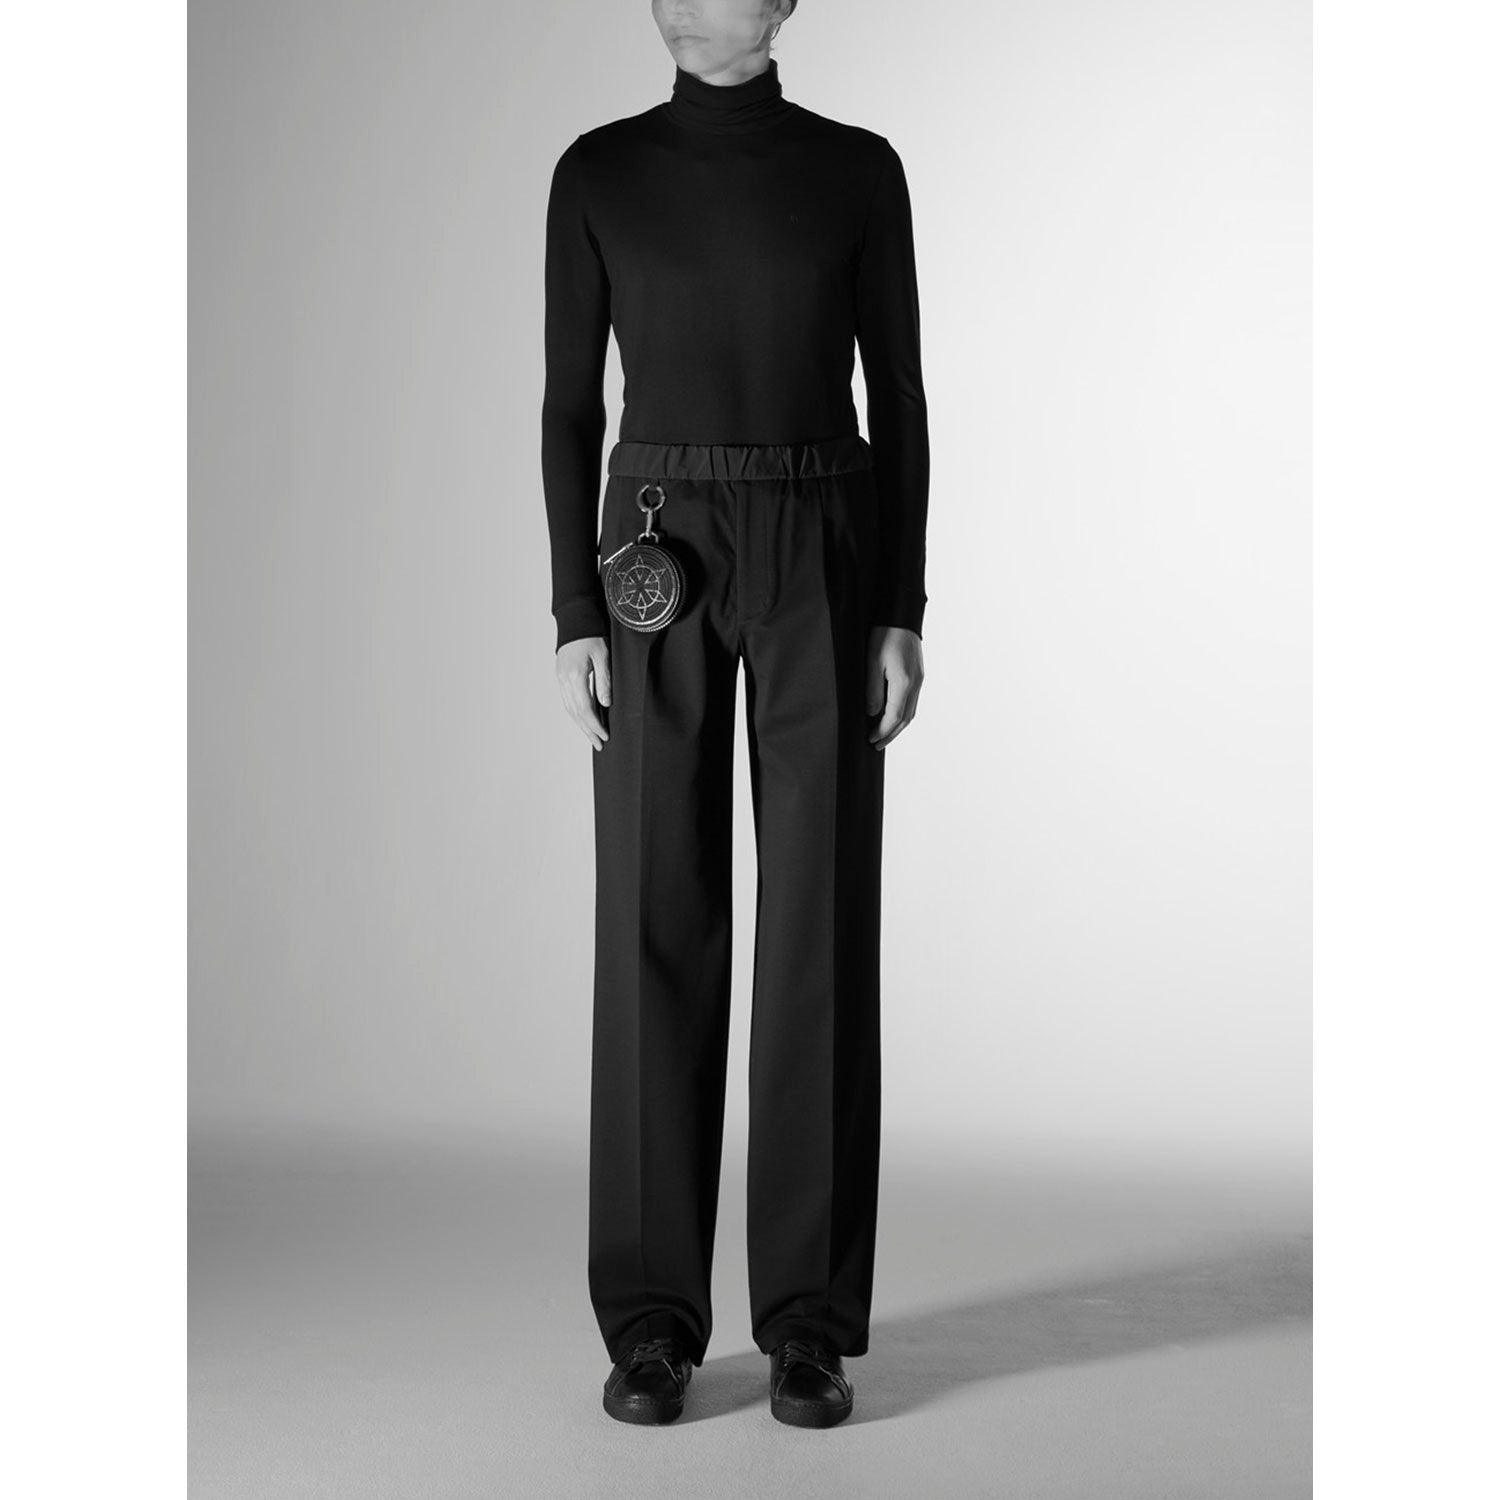 QUINN / Wide String Pants / black – th products